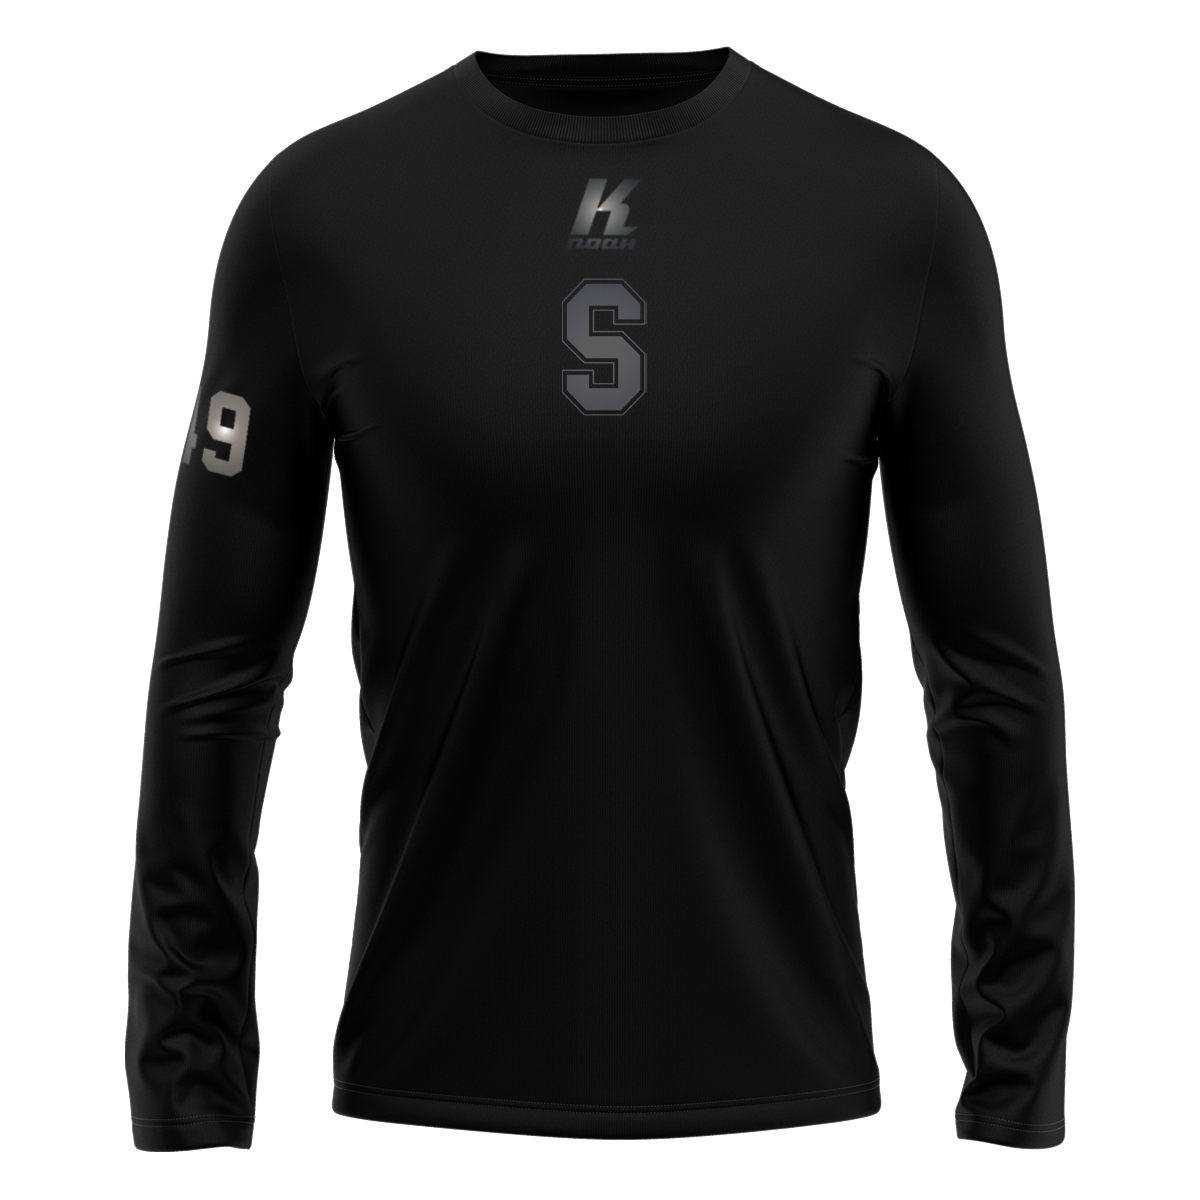 Scorpions "Blackline" K.Tech Longsleeve Tee L02071 with Playernumber/Initials